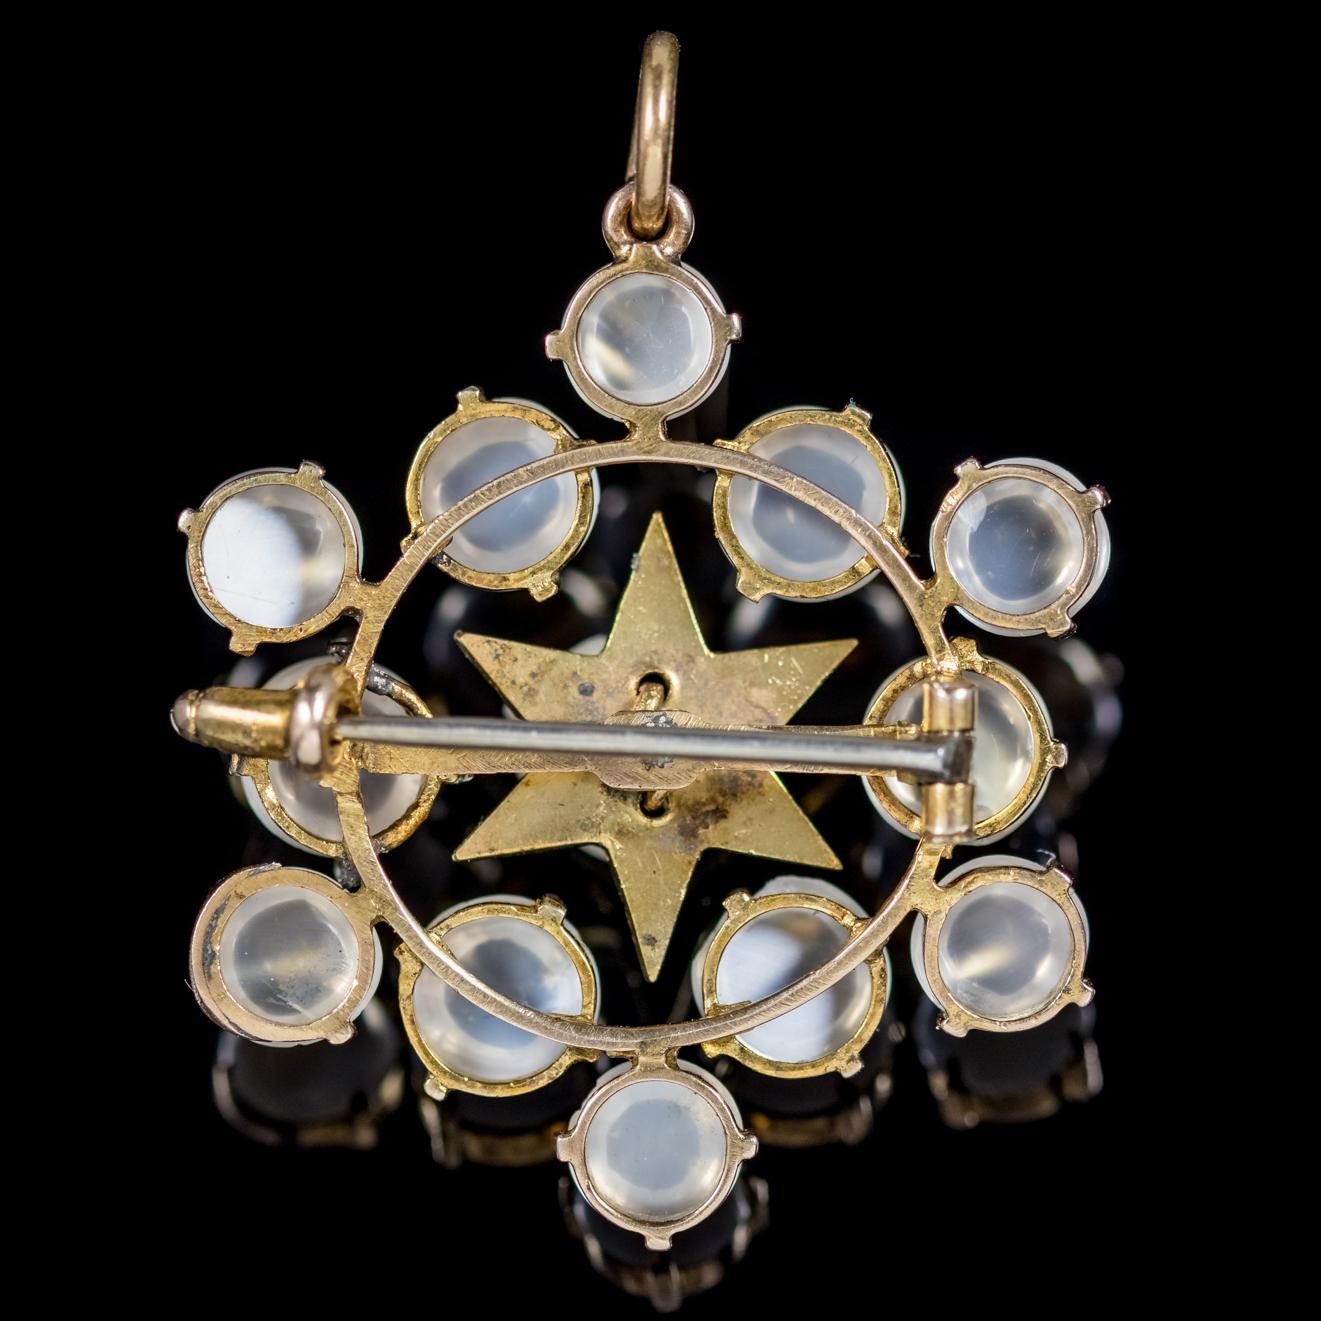 A wonderful antique Moonstone star pendant from the Victorian era, Circa 1880.

The piece is decorated with thirteen cabochon cut Moonstones, approx. 0.50ct to 0.65ct  each and laid out in a pretty star shaped design. 

Moonstone has a lovely